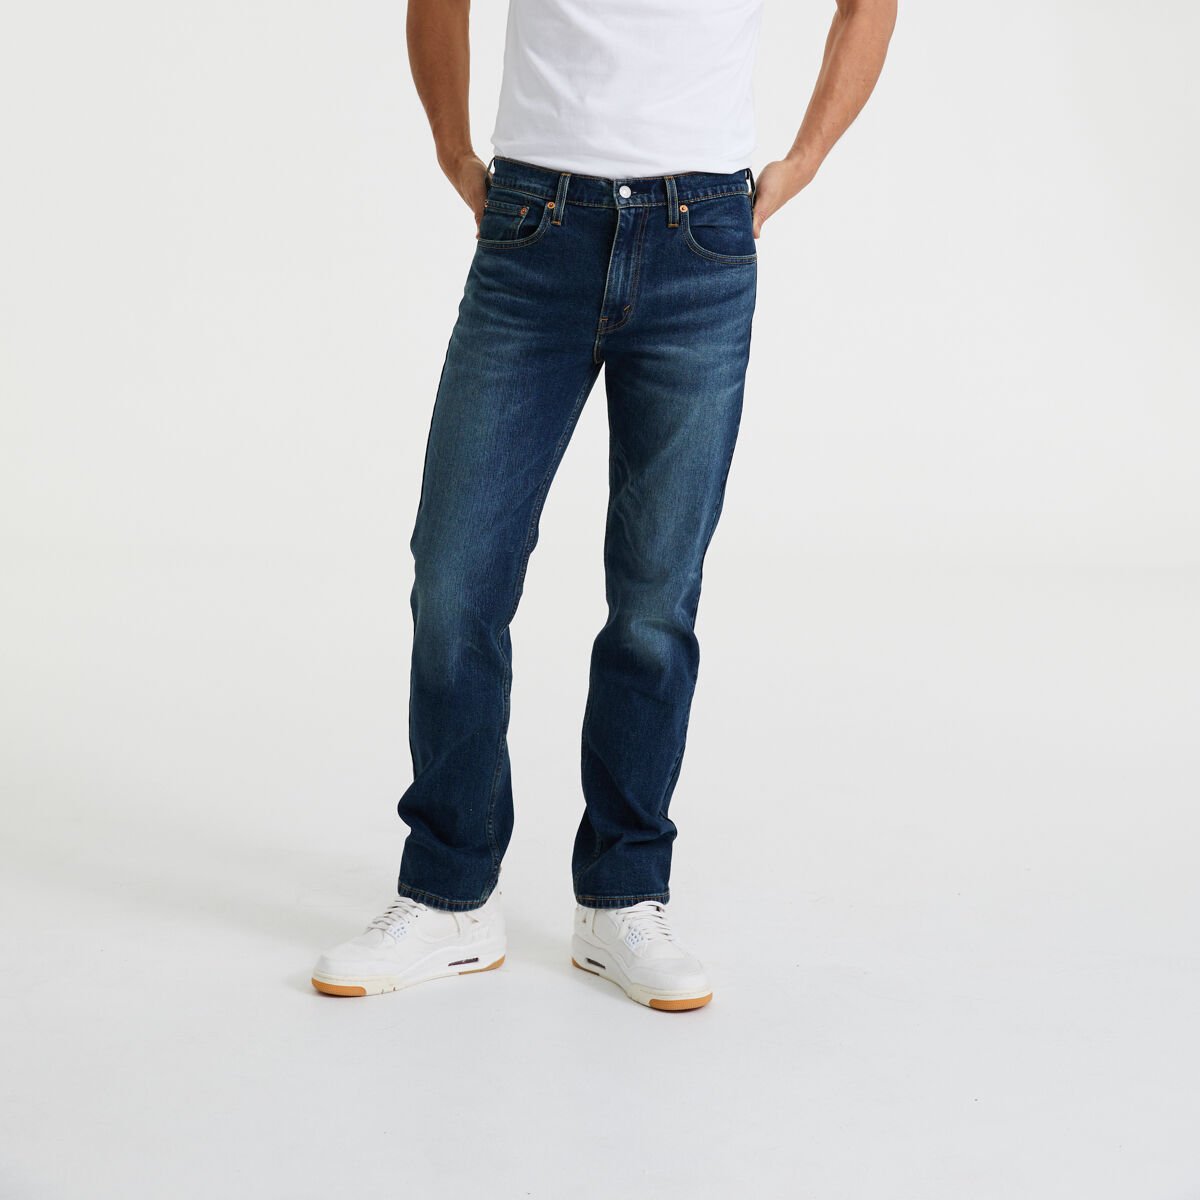 Men's Sale Clothing from Levi's 